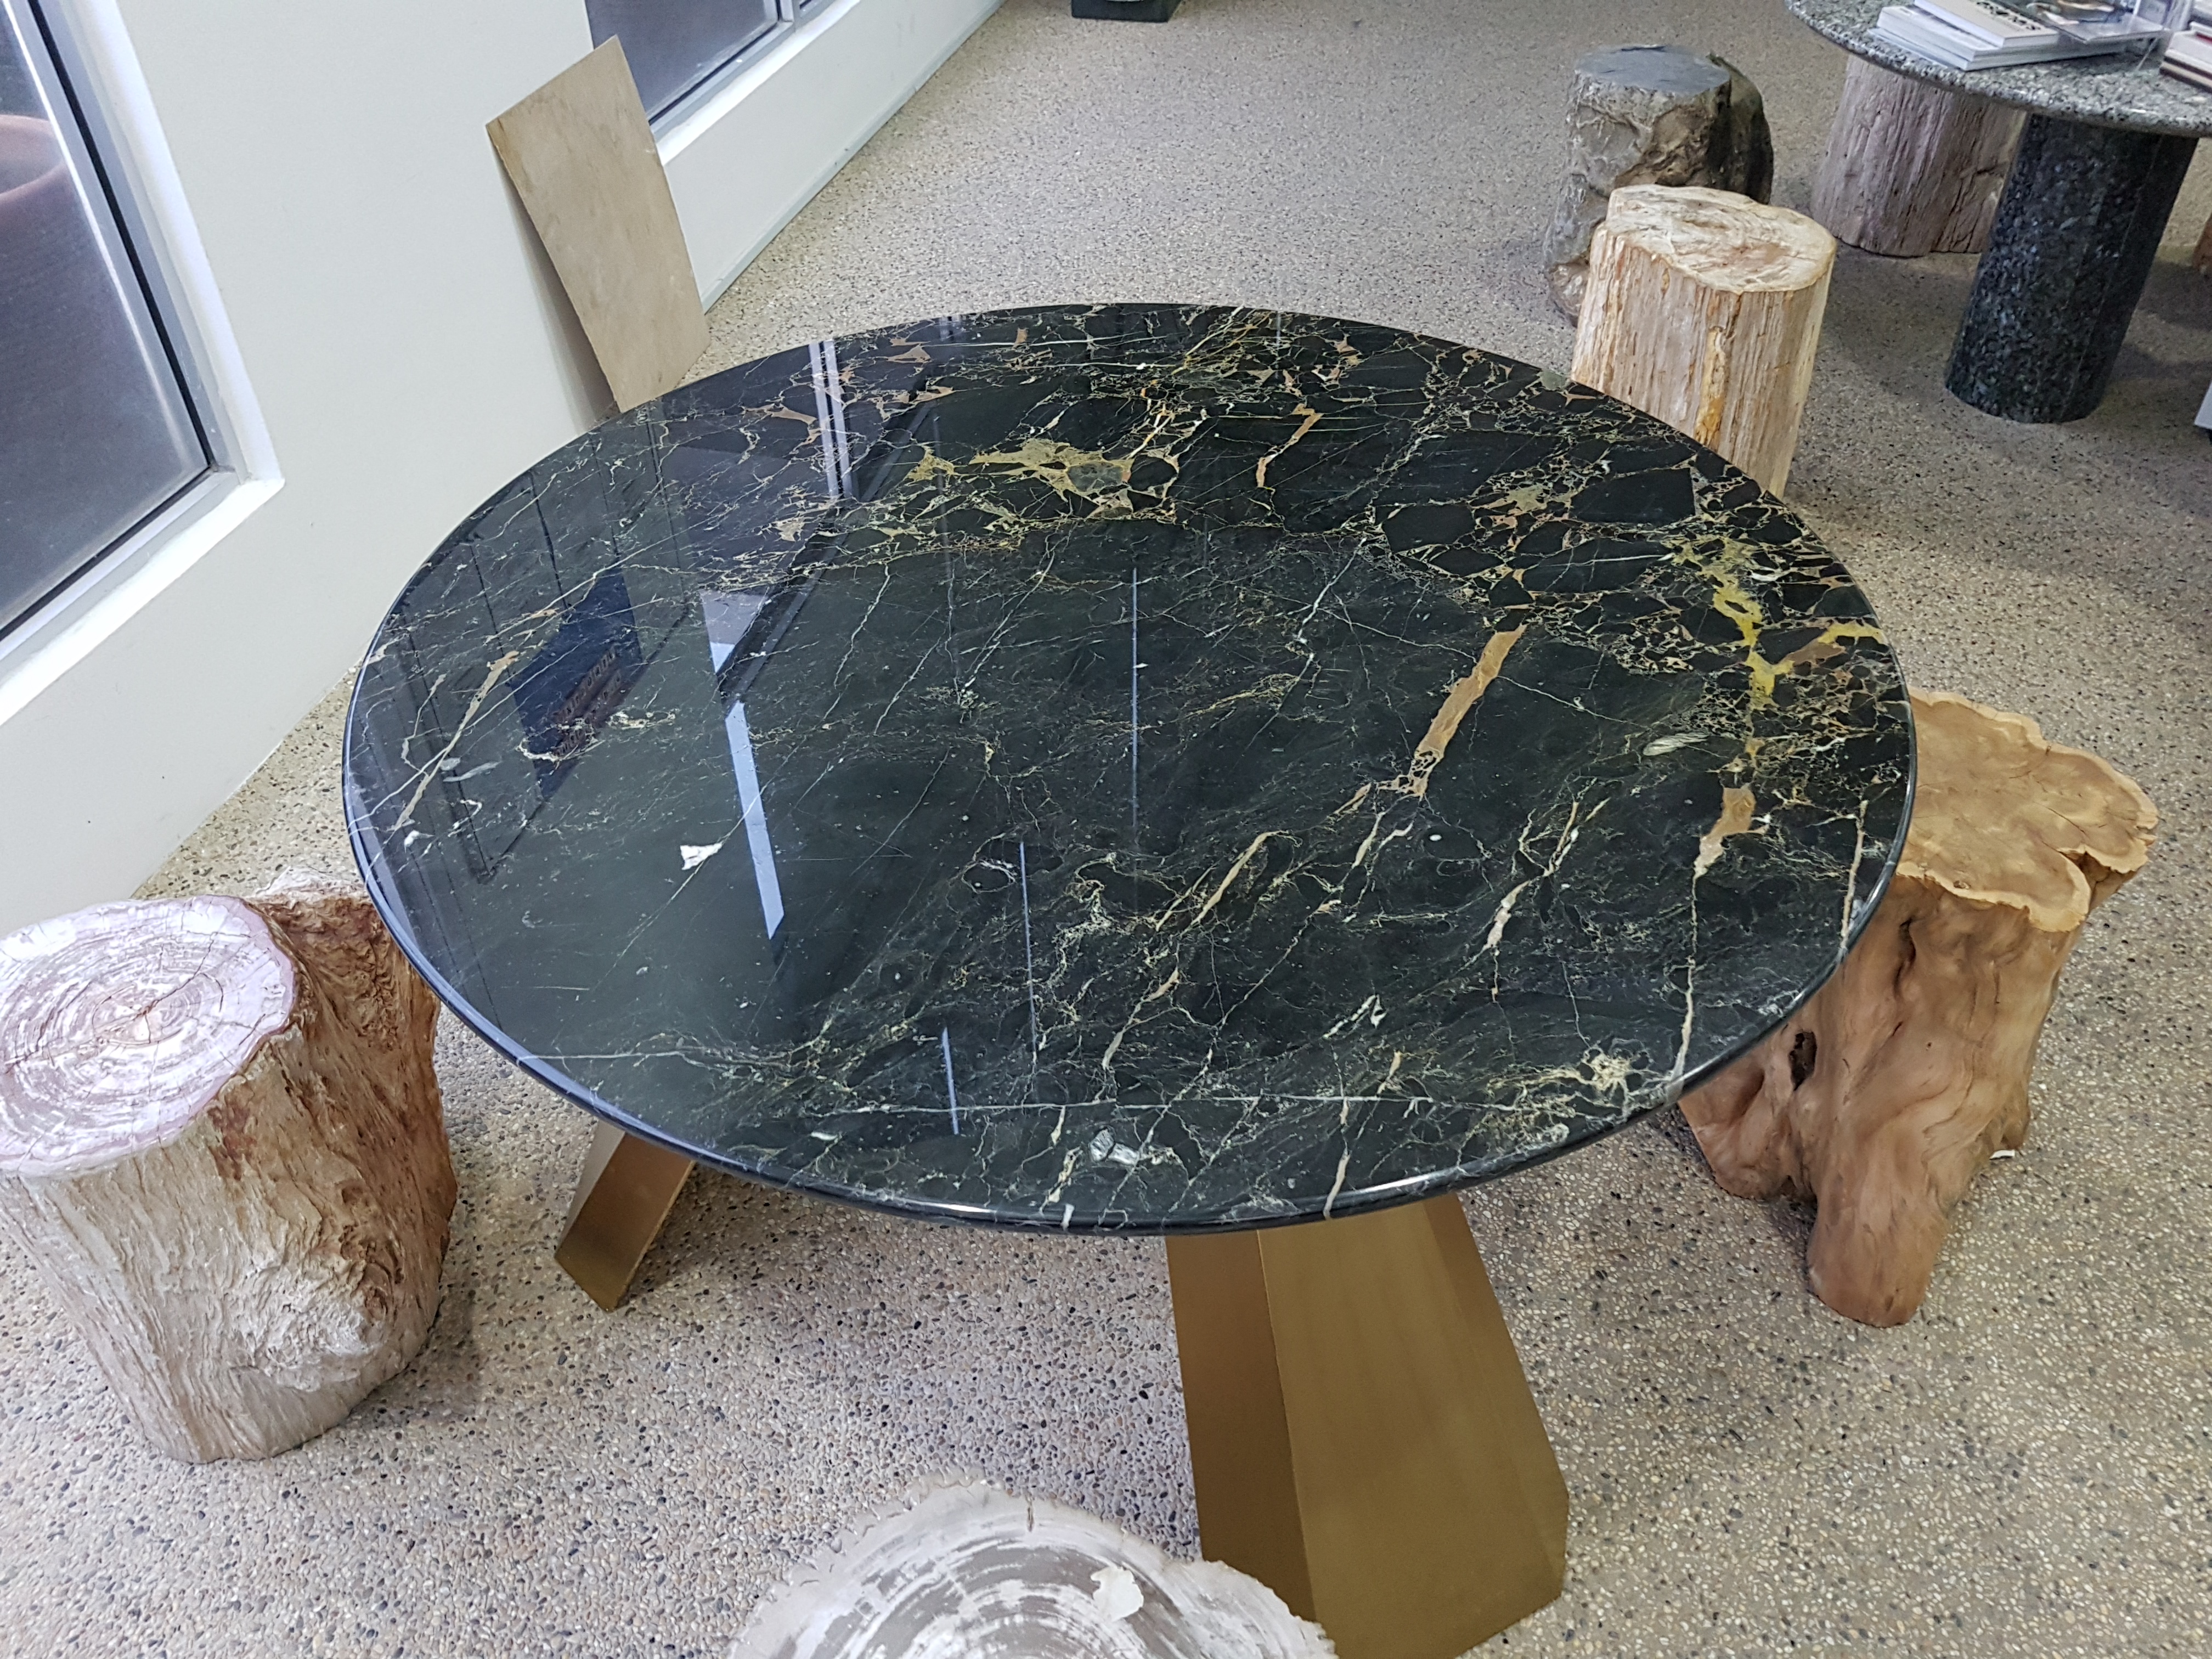 Gallery - Table Top | Express Marble Sdn Bhd | Malaysia | Marble, Granite, Natural Stone, Interior Design